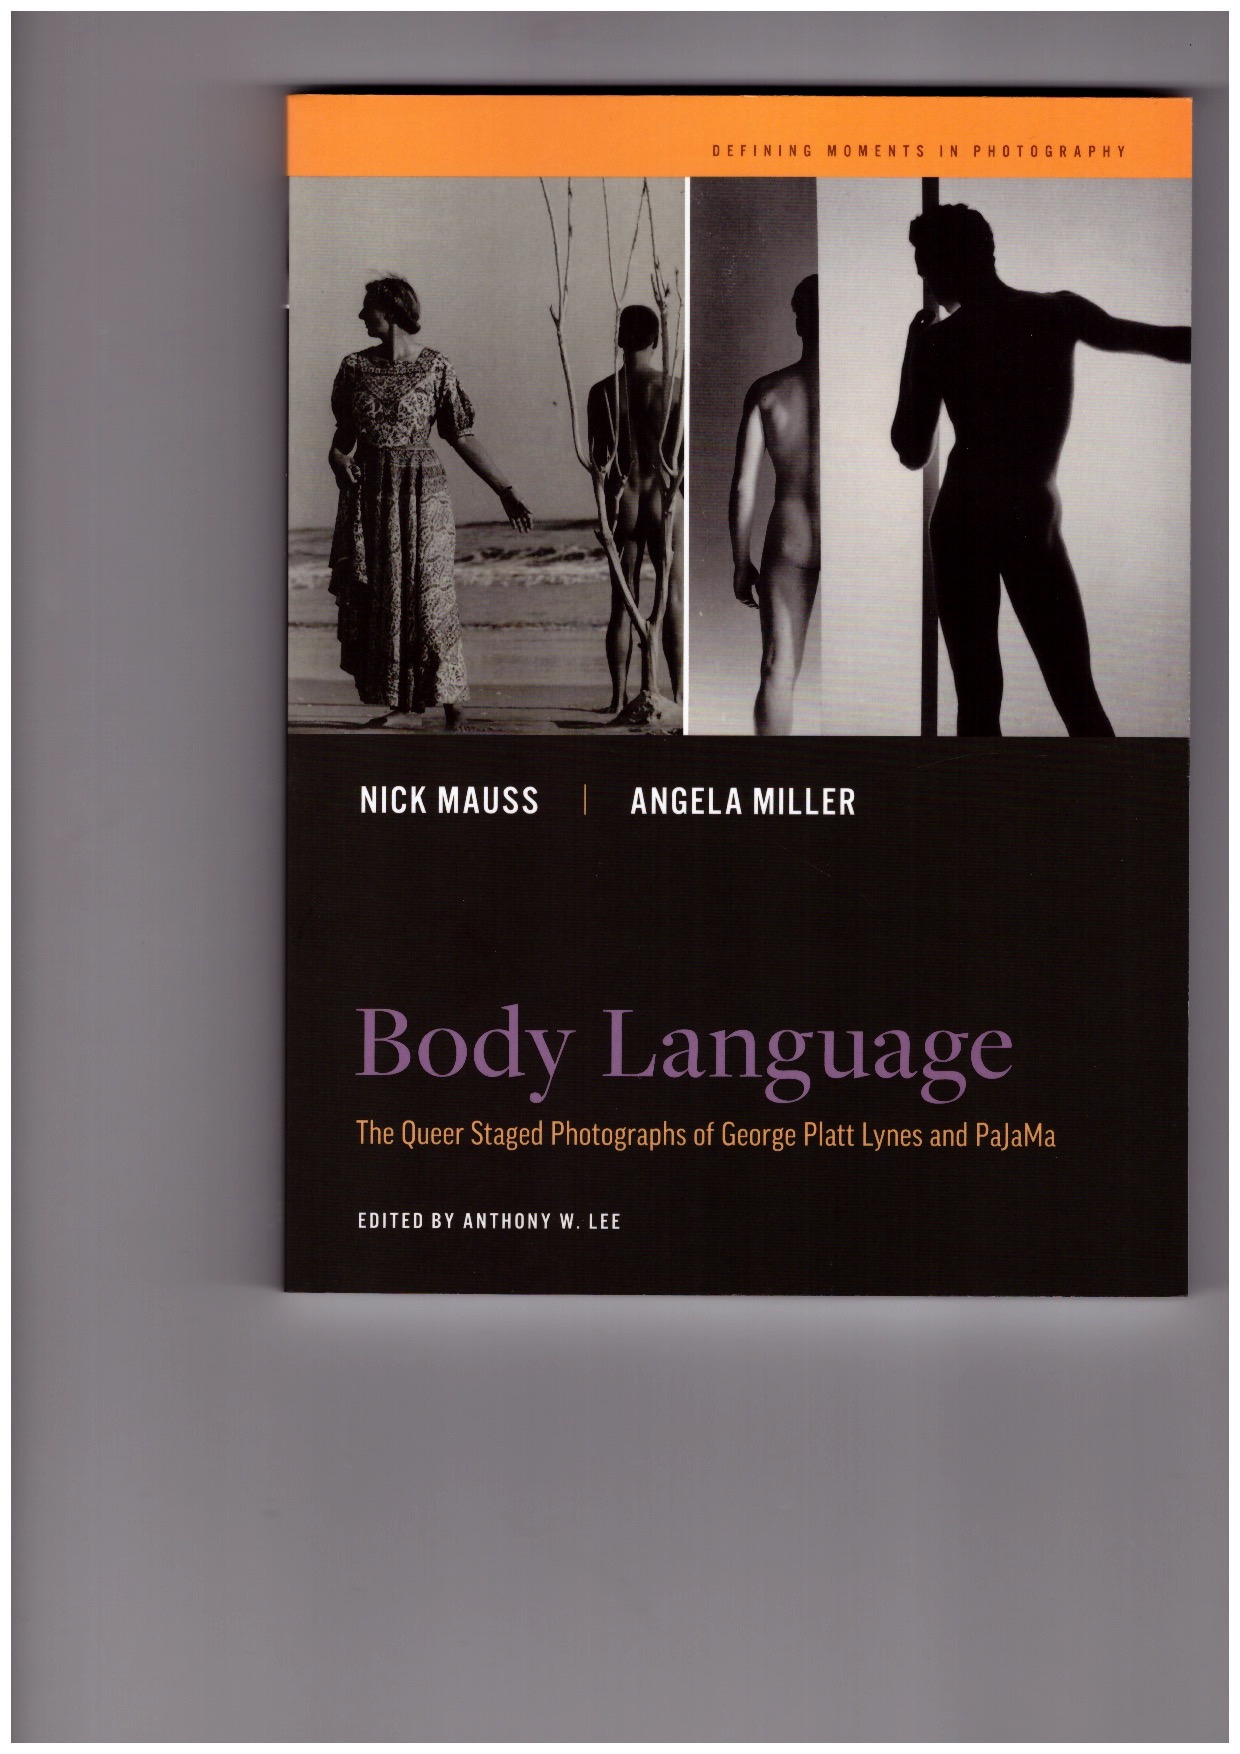 LEE, Anthony W. (ed.); MAUSS, Nicholas; MILLER, Angela - Body Language: The Queer Staged Photographs of George Platt Lynes and PaJaMa